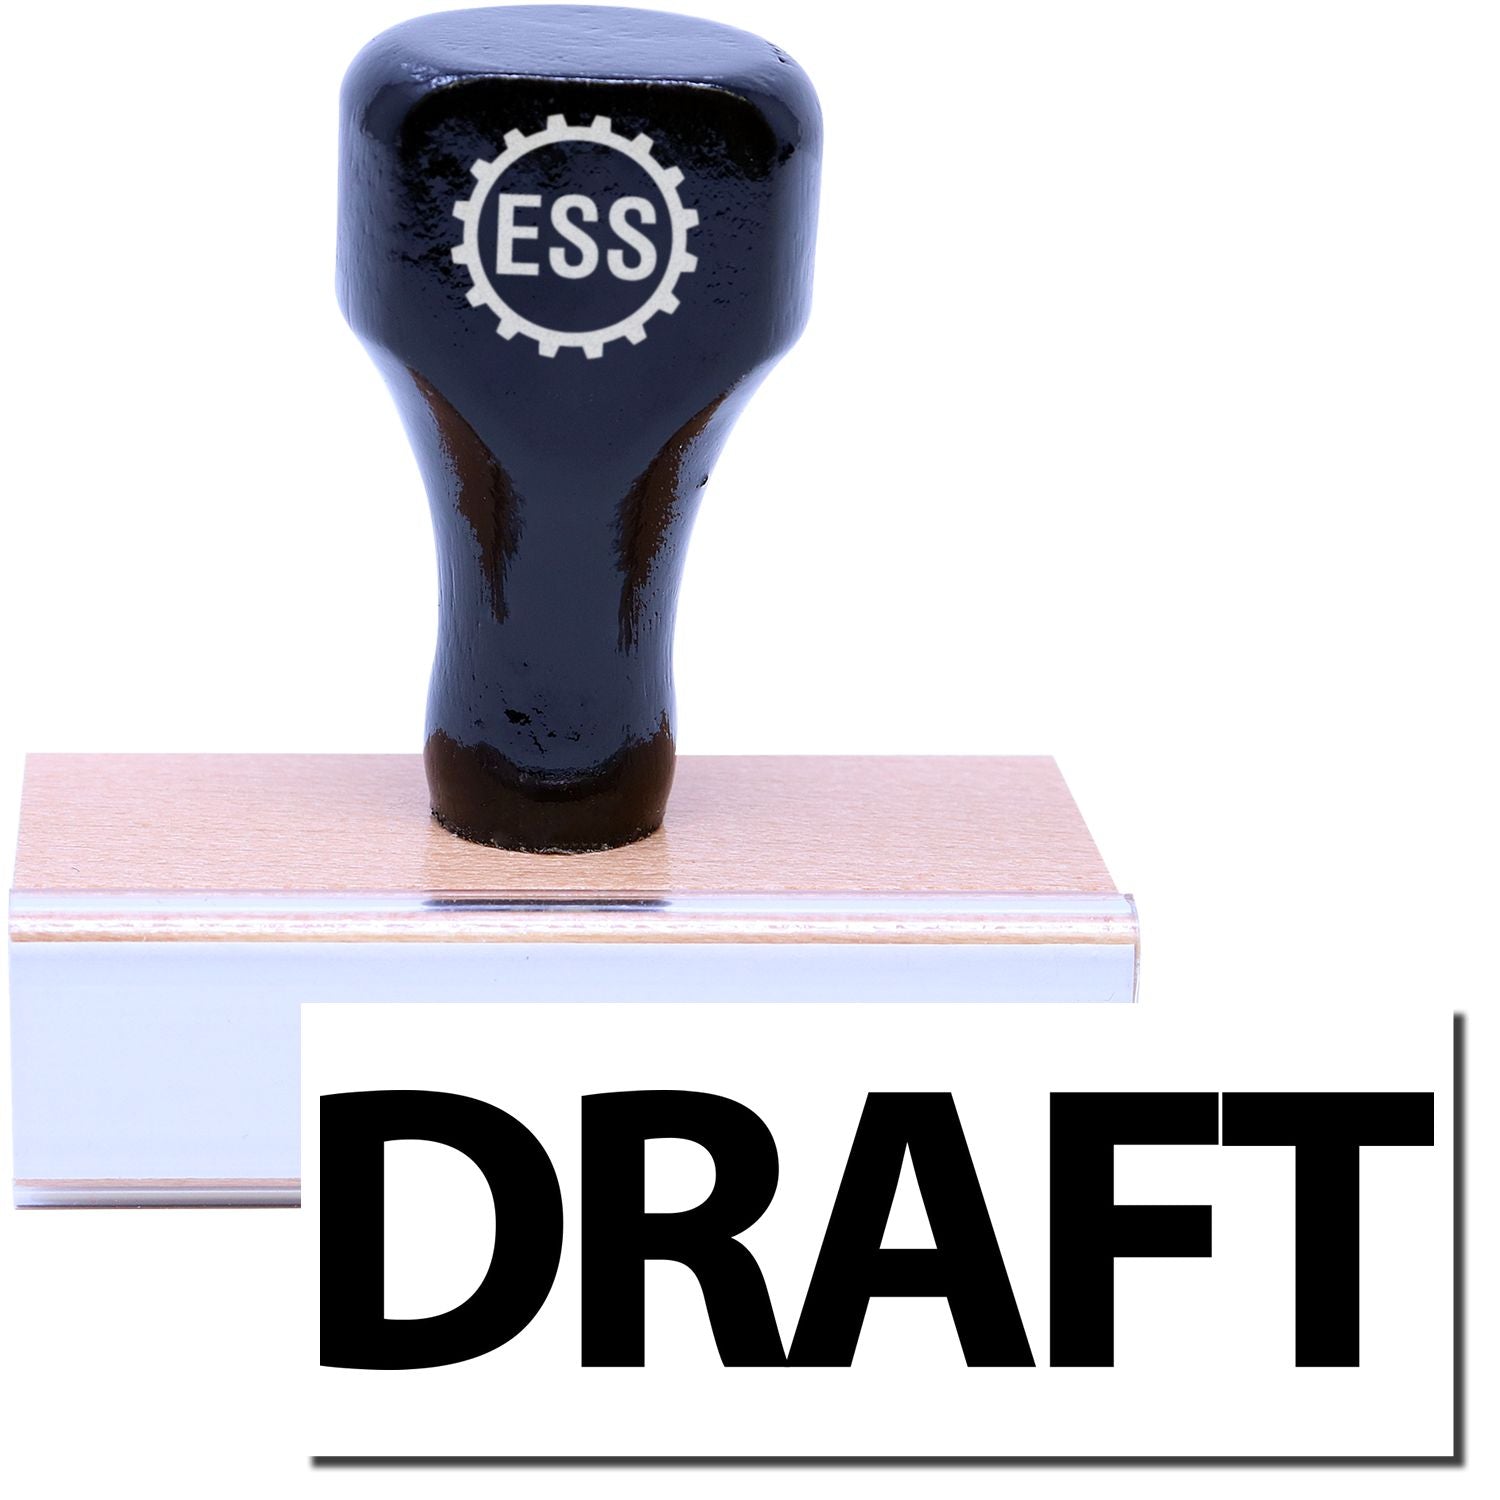 A stock office rubber stamp with a stamped image showing how the text "DRAFT" in bold font is displayed after stamping.